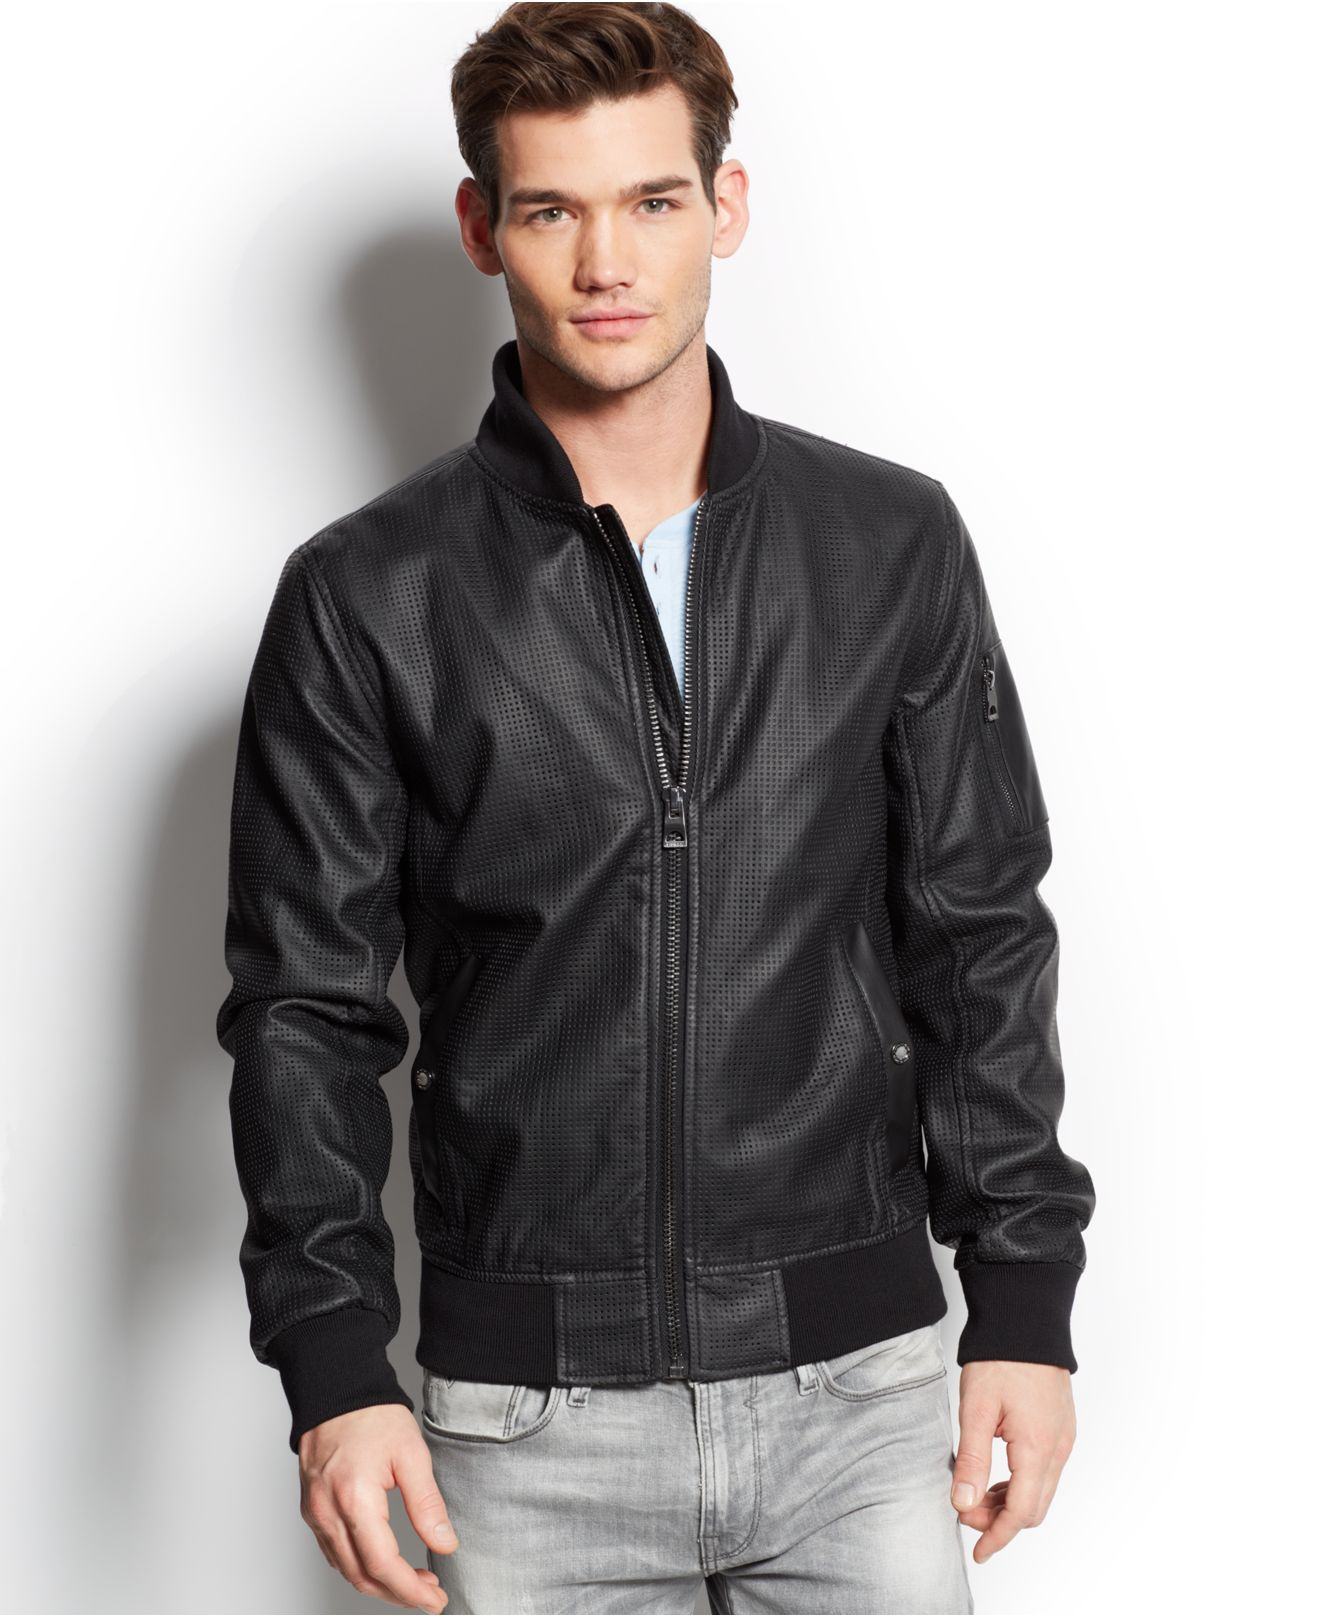 Lyst - Guess Perforated Faux-Leather Jacket in Black for Men